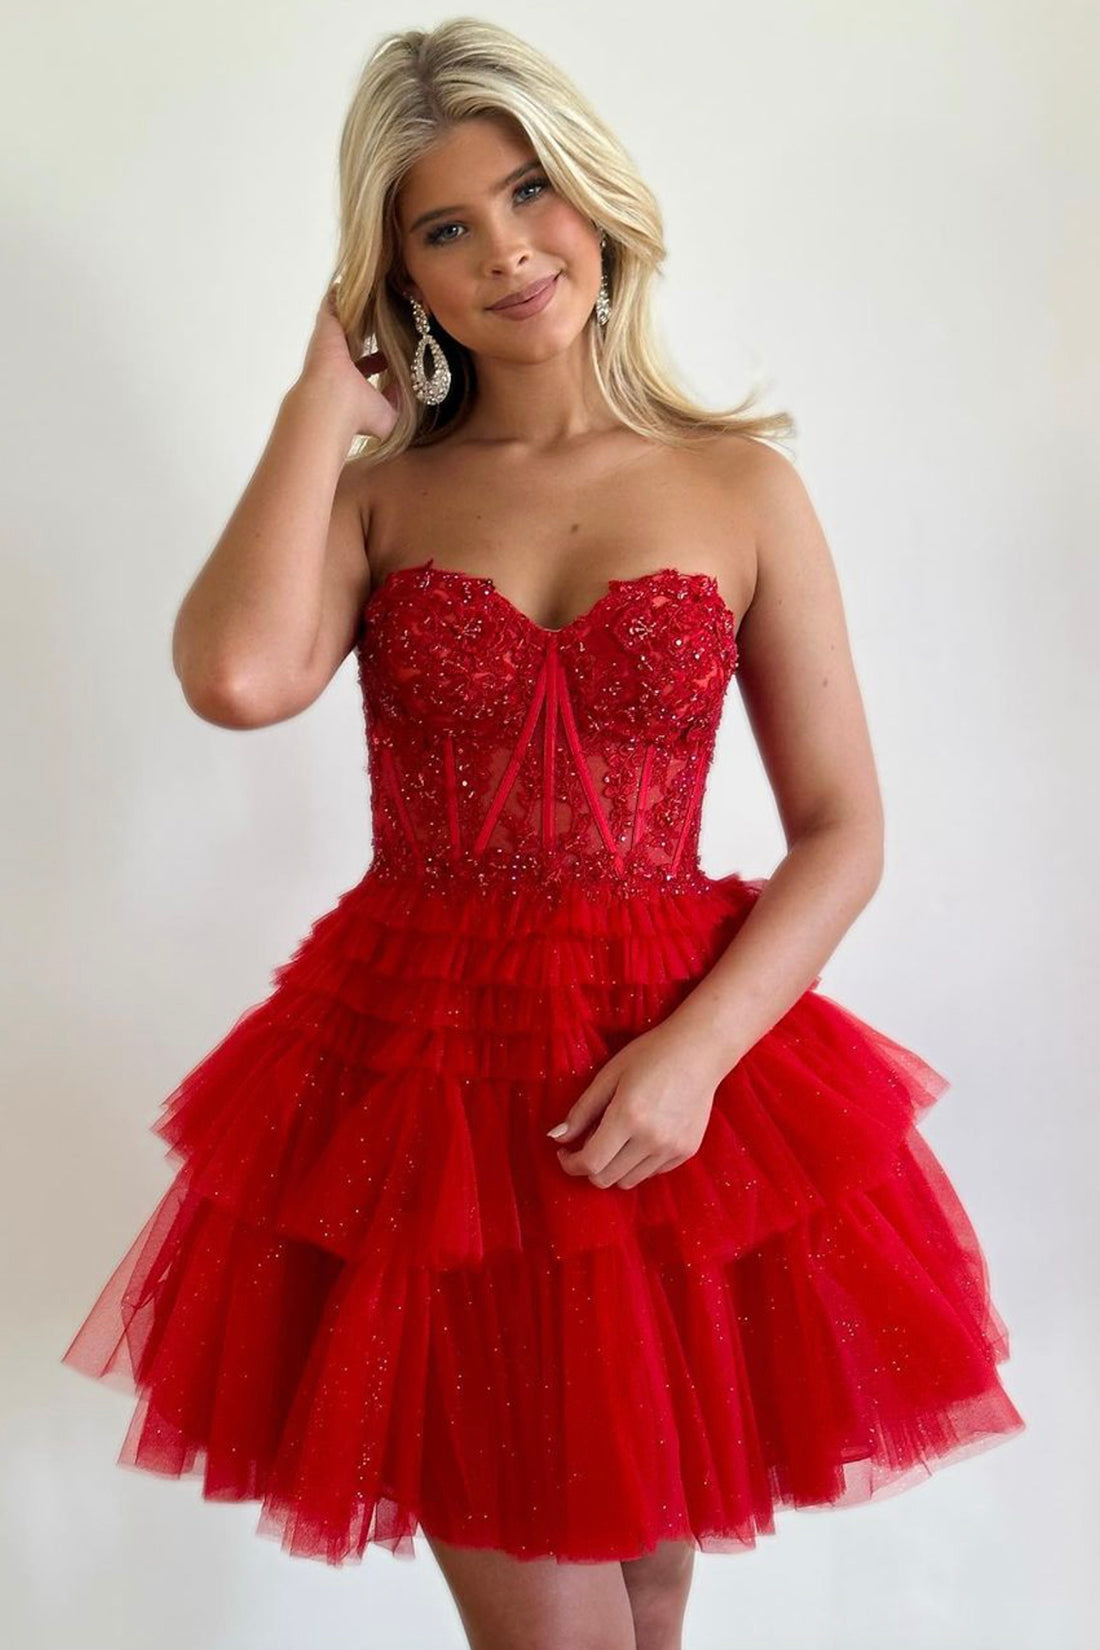 Red Tulle Lace Short Prom Dress, Cute Strapless A-Line Sweetheart Homecoming Dress